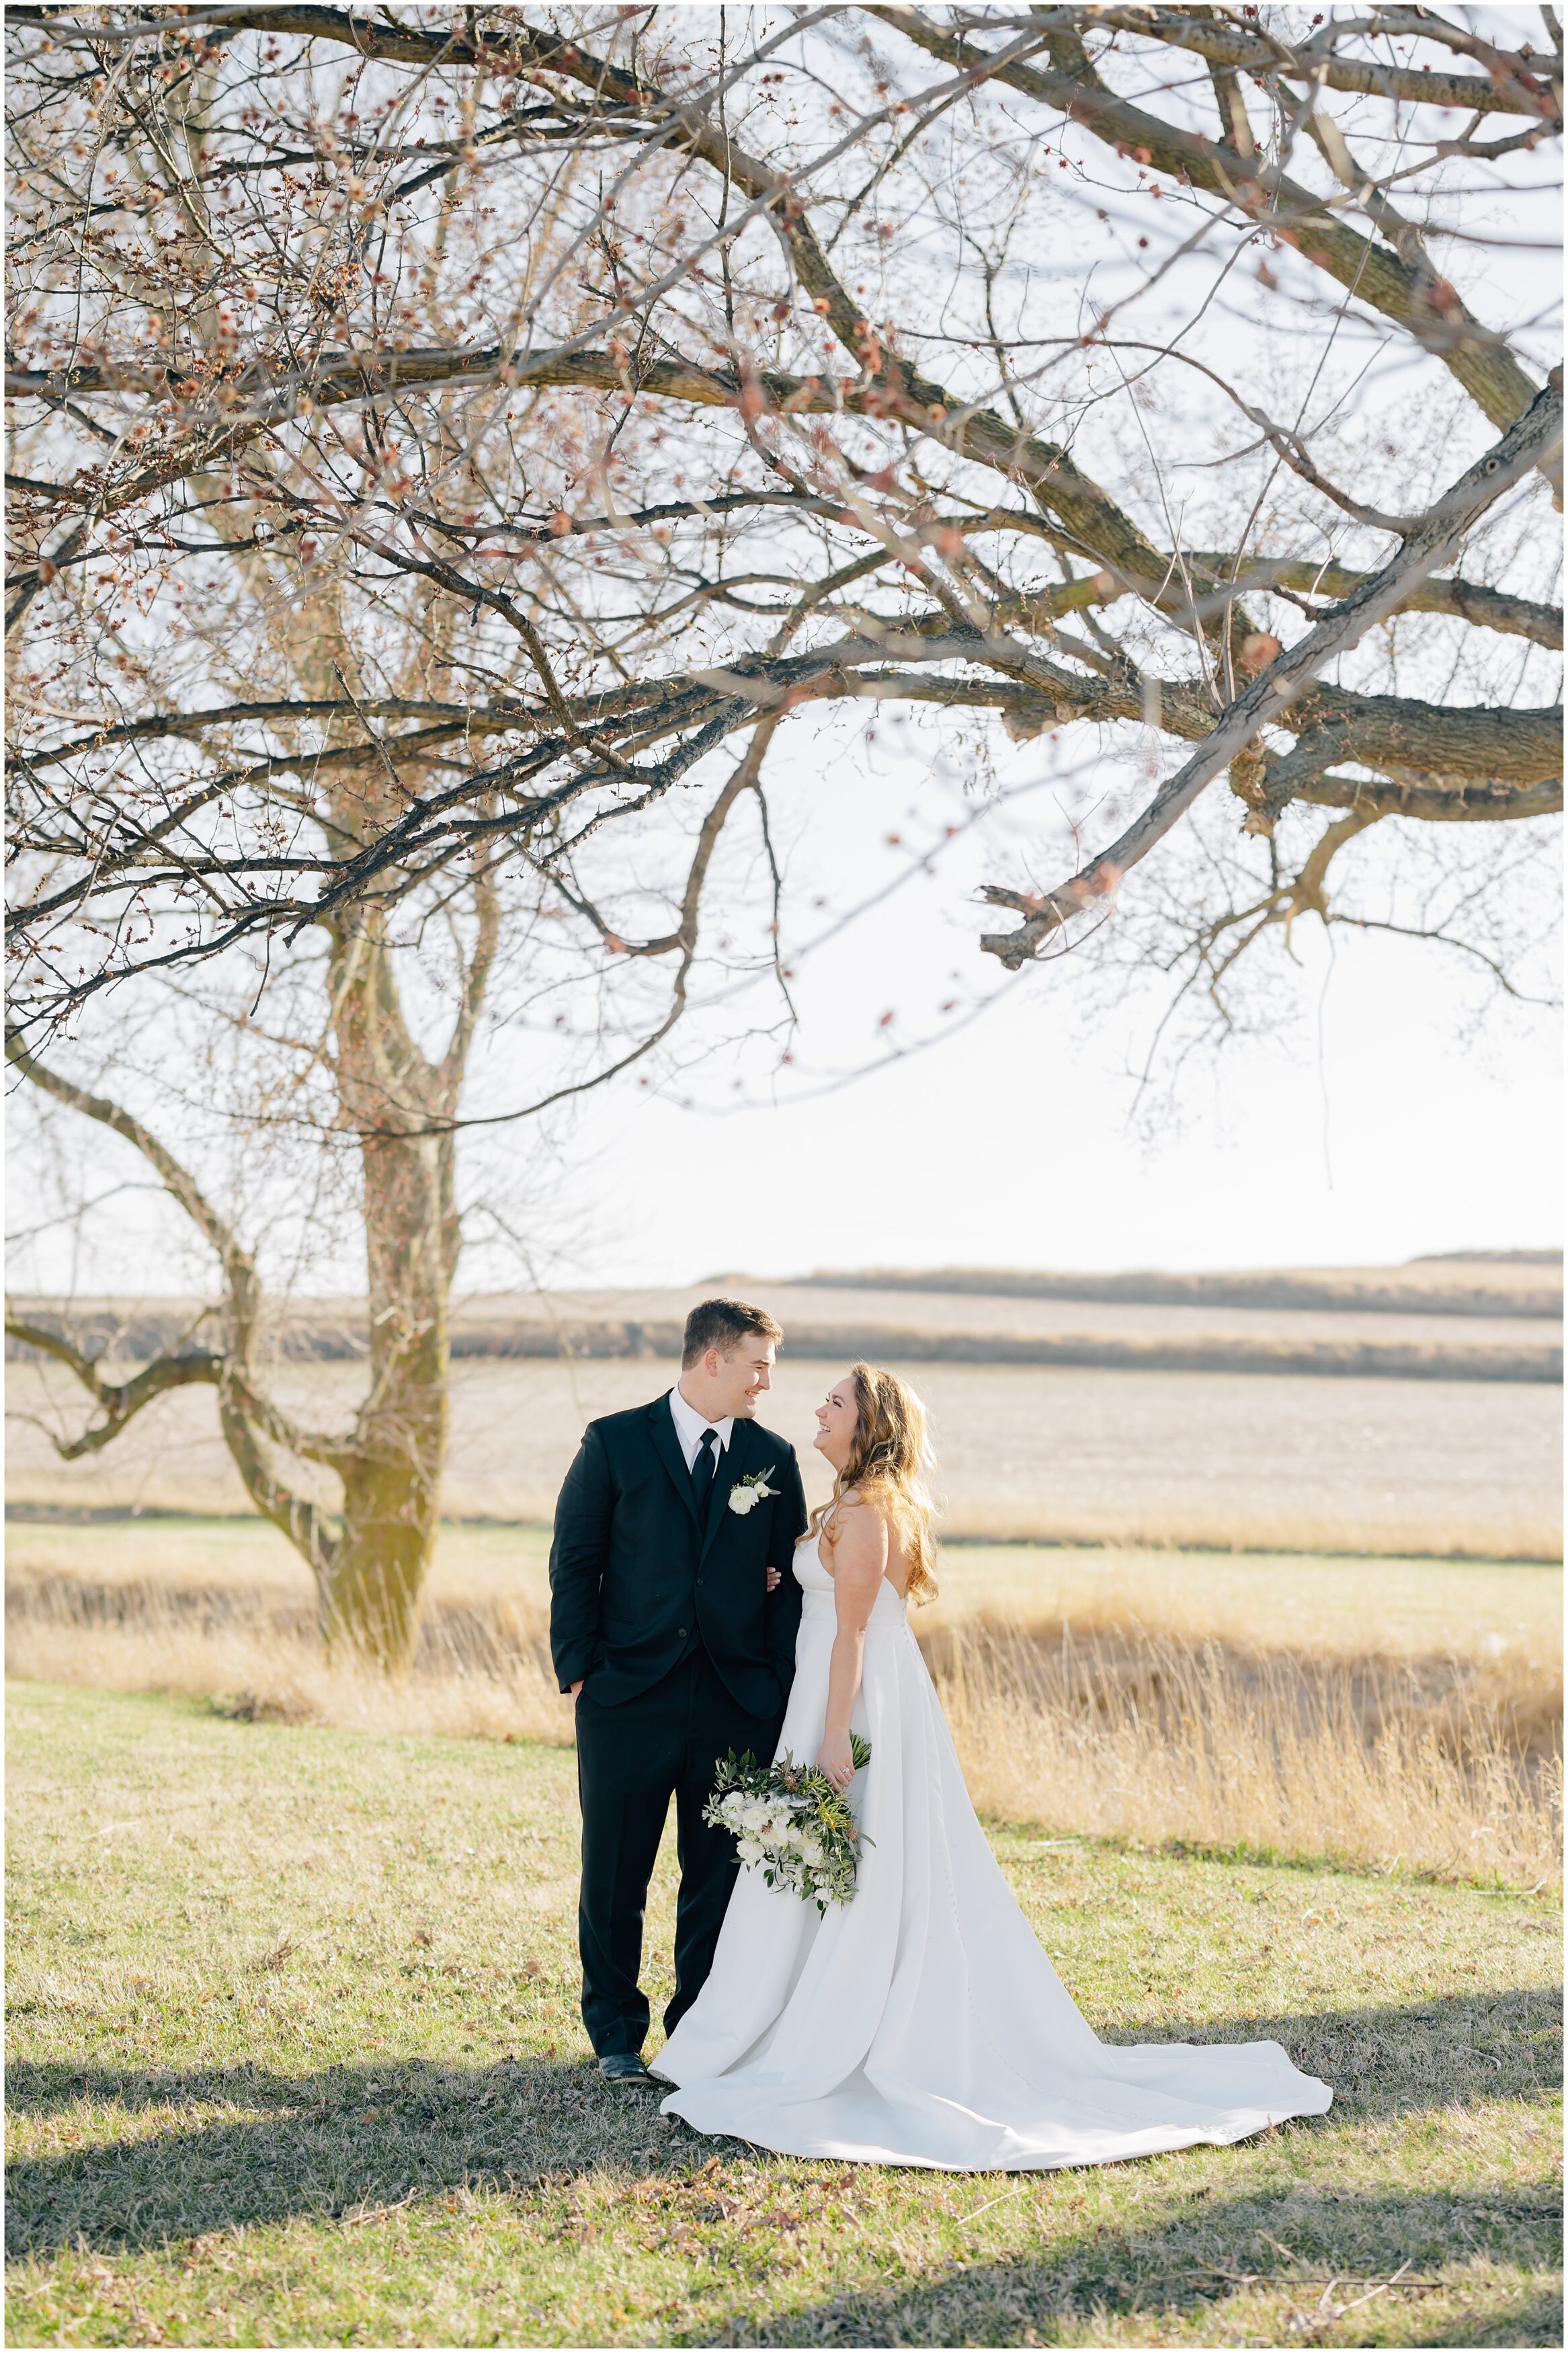 Bride white gown with a greenery  white rose bouquet smiles up at groom, wearing a black suit and cowboy boots during their Palace Event Center wedding in Treynor Ia. Photo by Anna brace, a wedding photographer in Omaha.